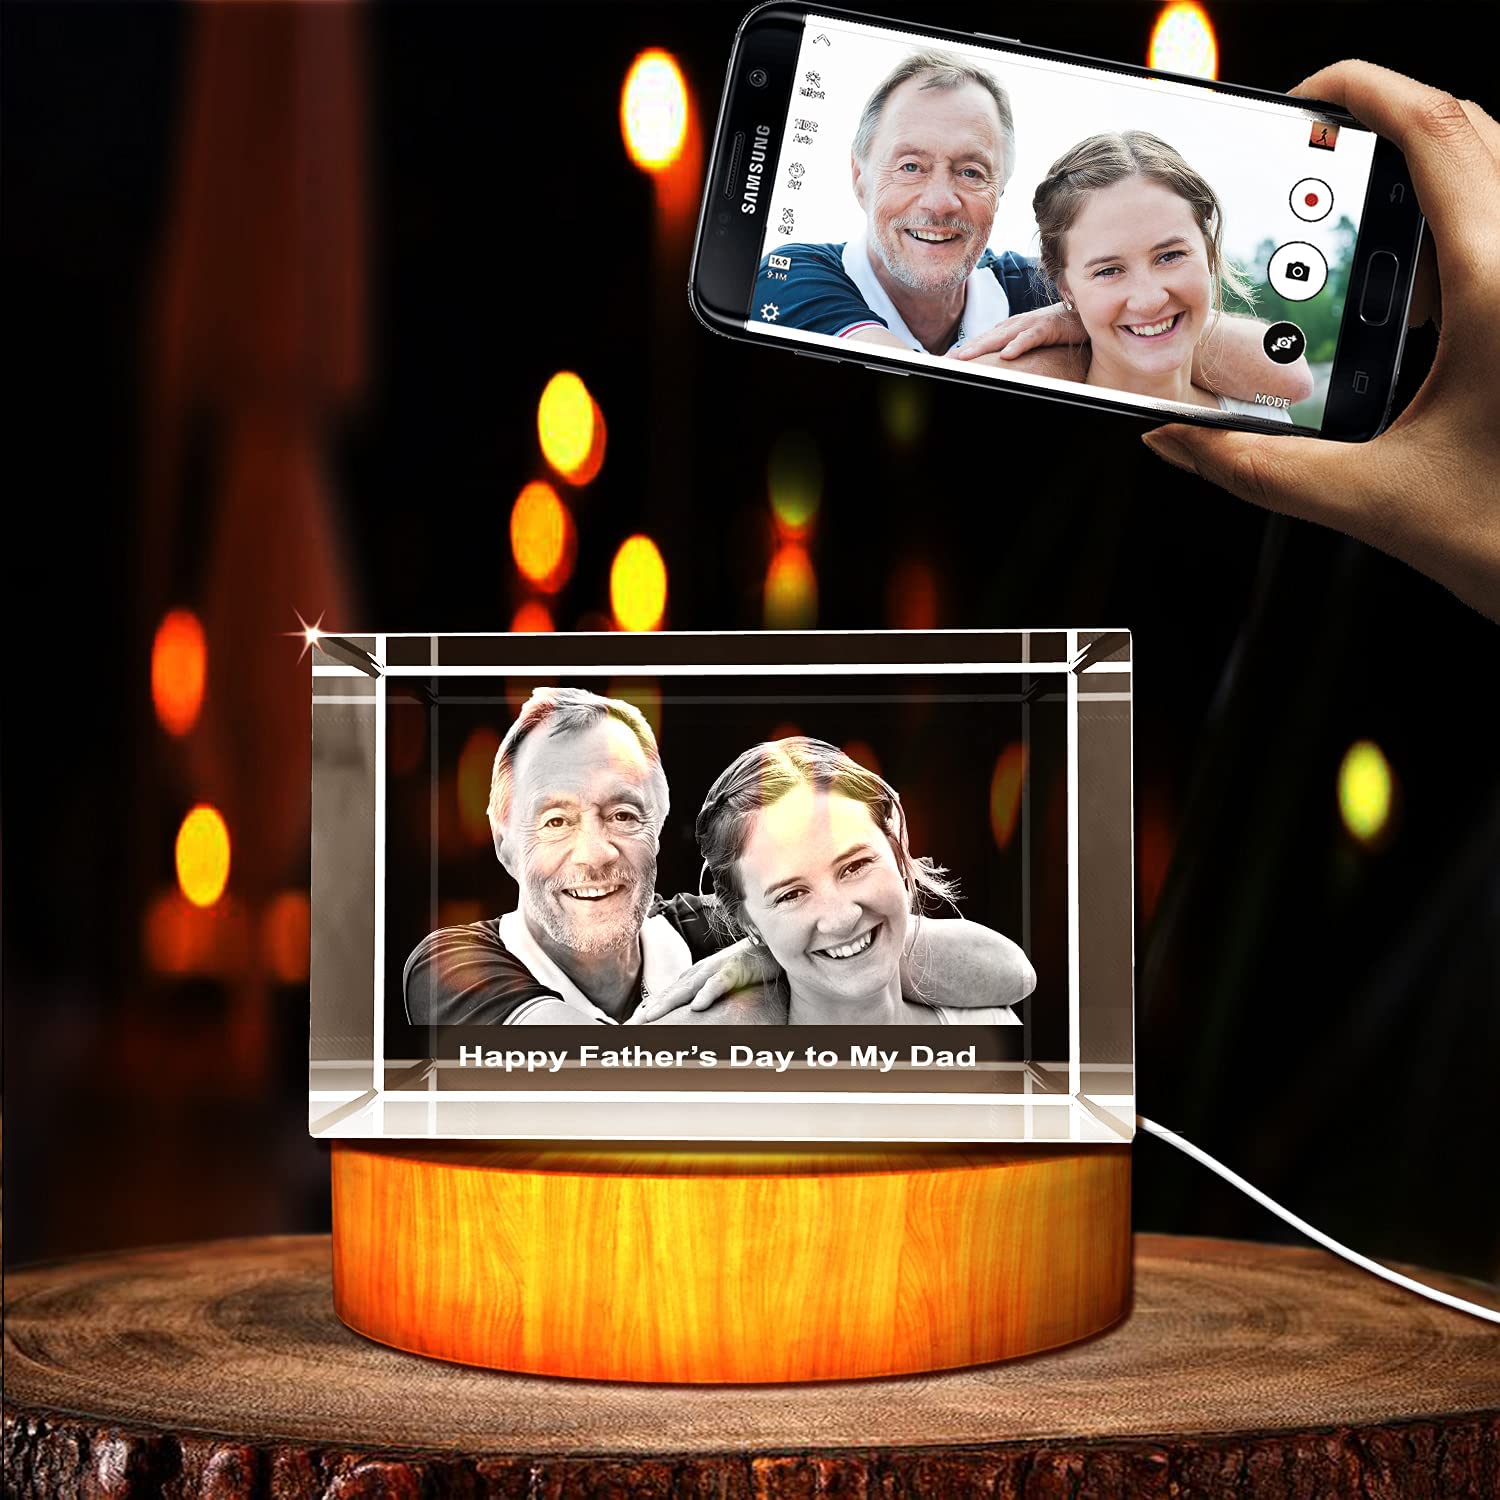 Personalized Father's Day Gift Ideas—Personal-Custom-3D-Photo-Engraved-Crystal